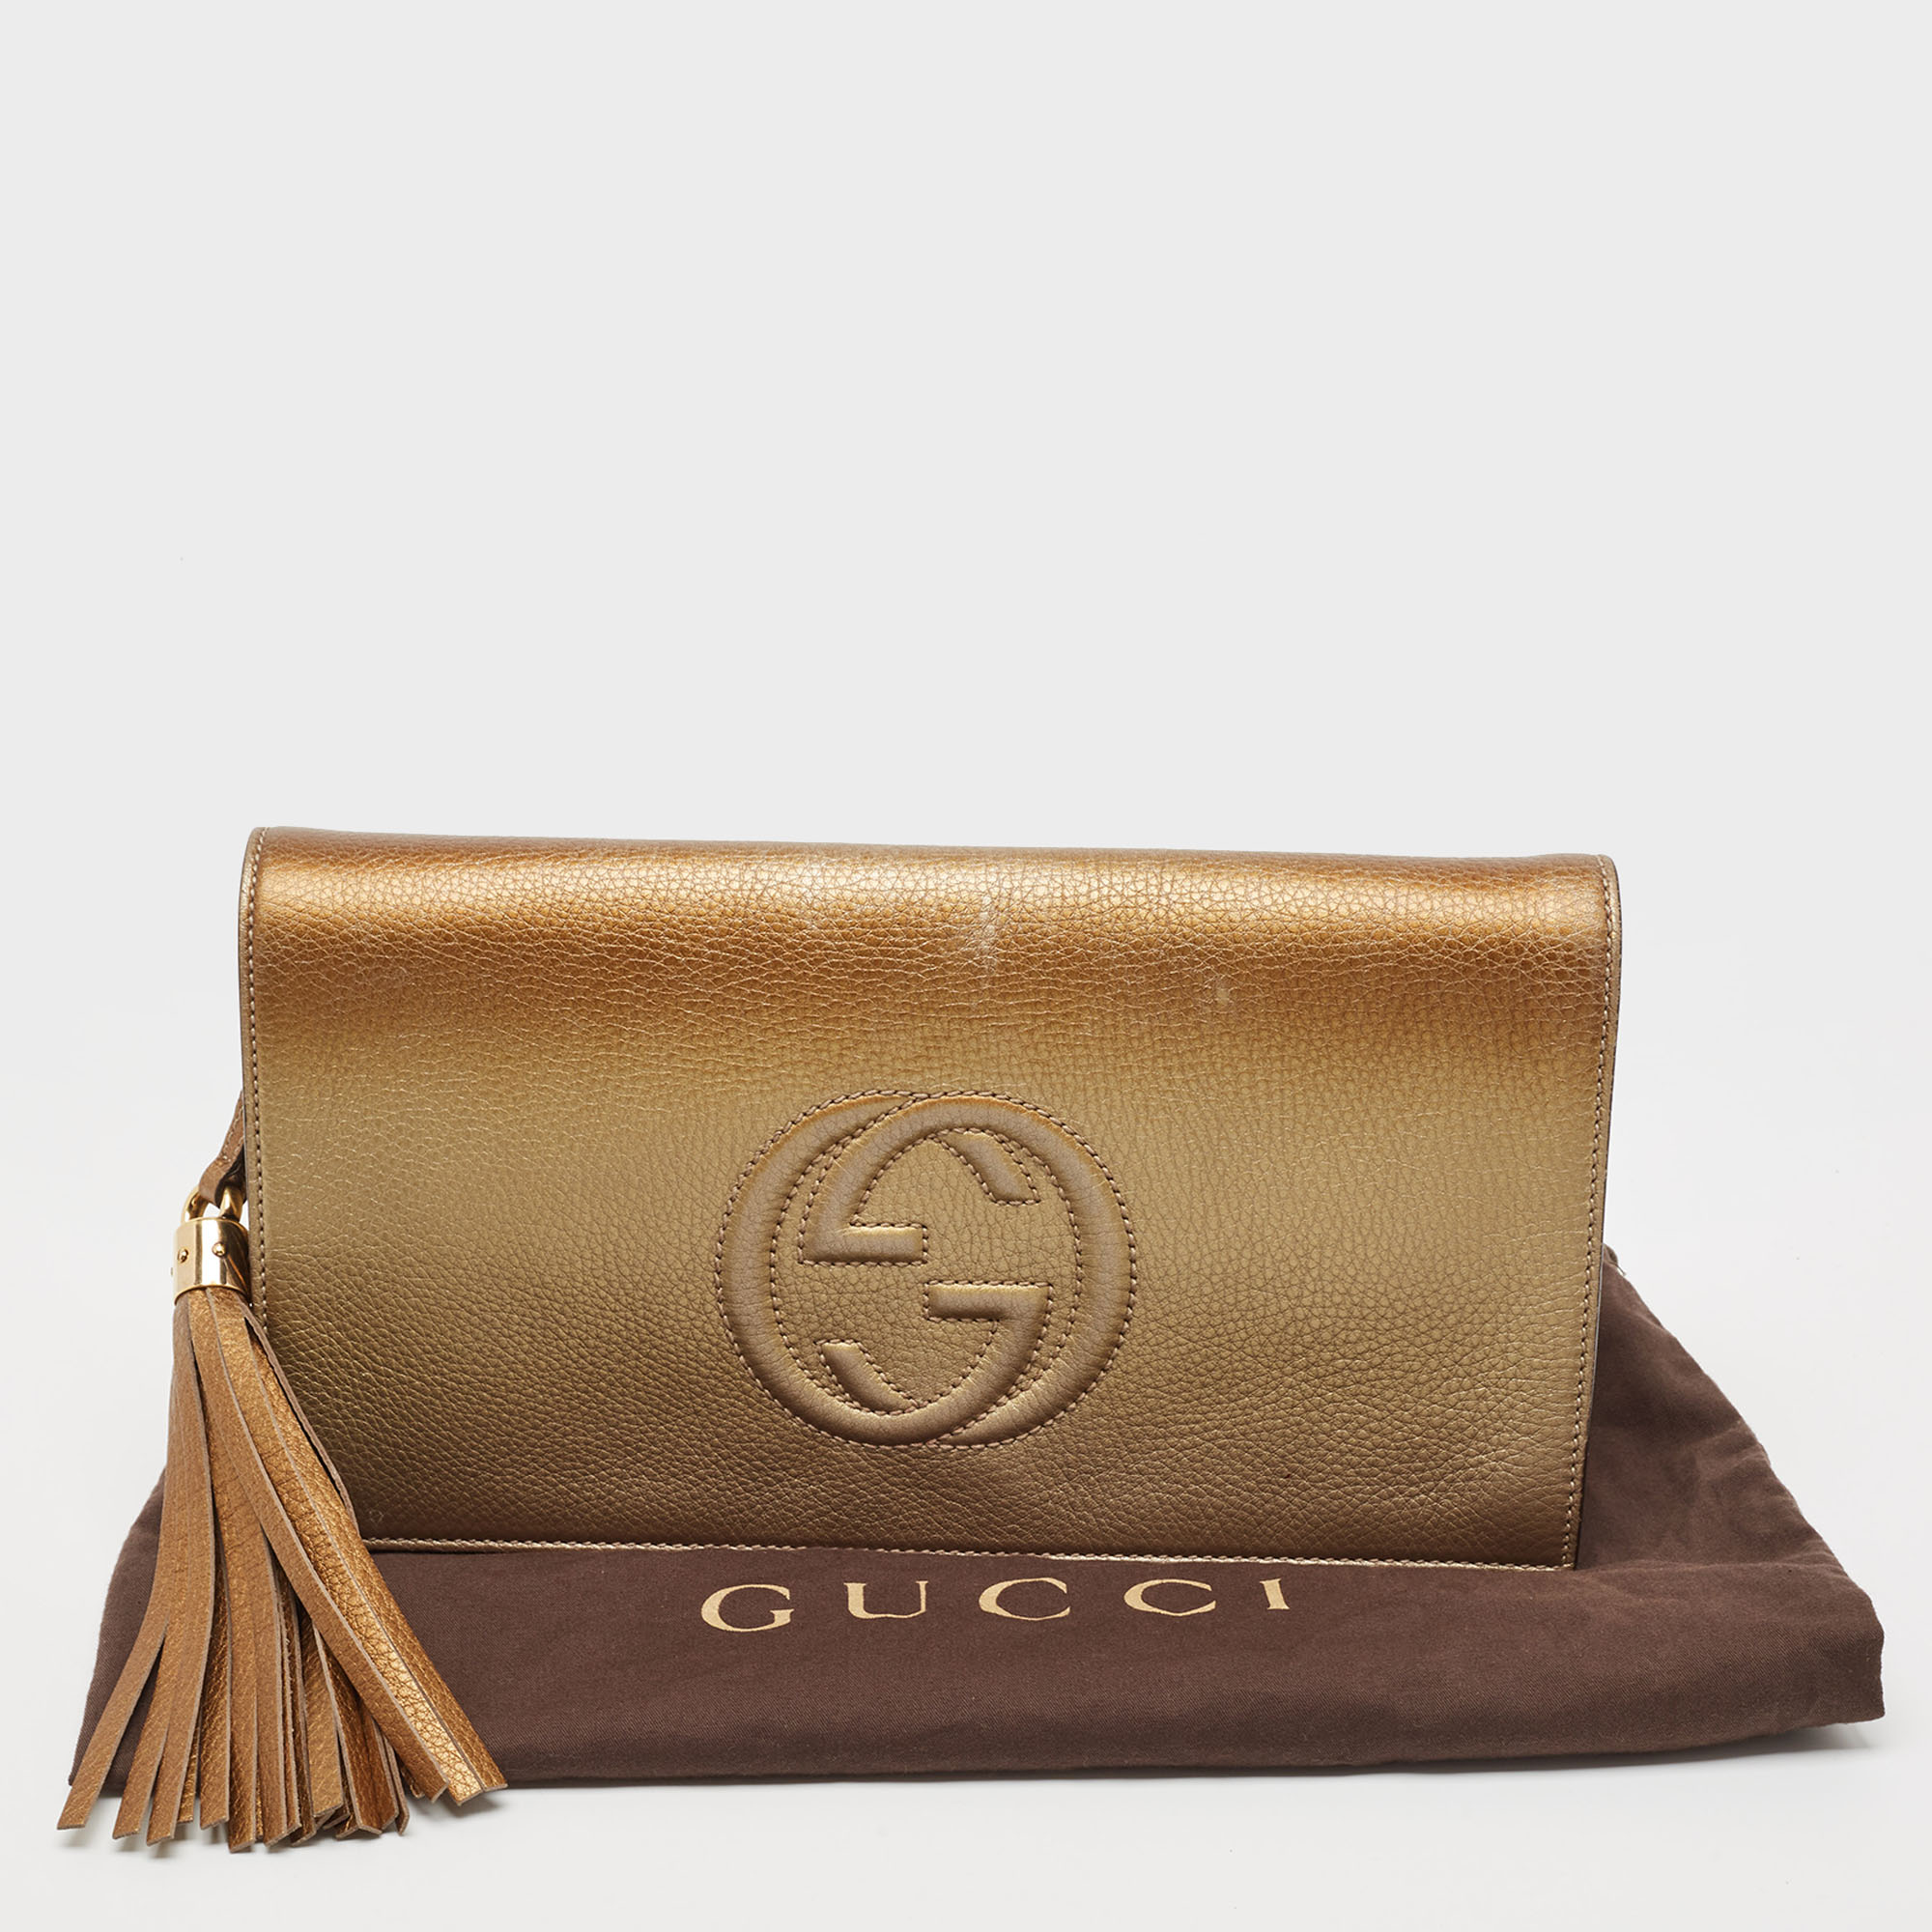 Gucci Gold Ombre Leather Soho Tassel Clutch